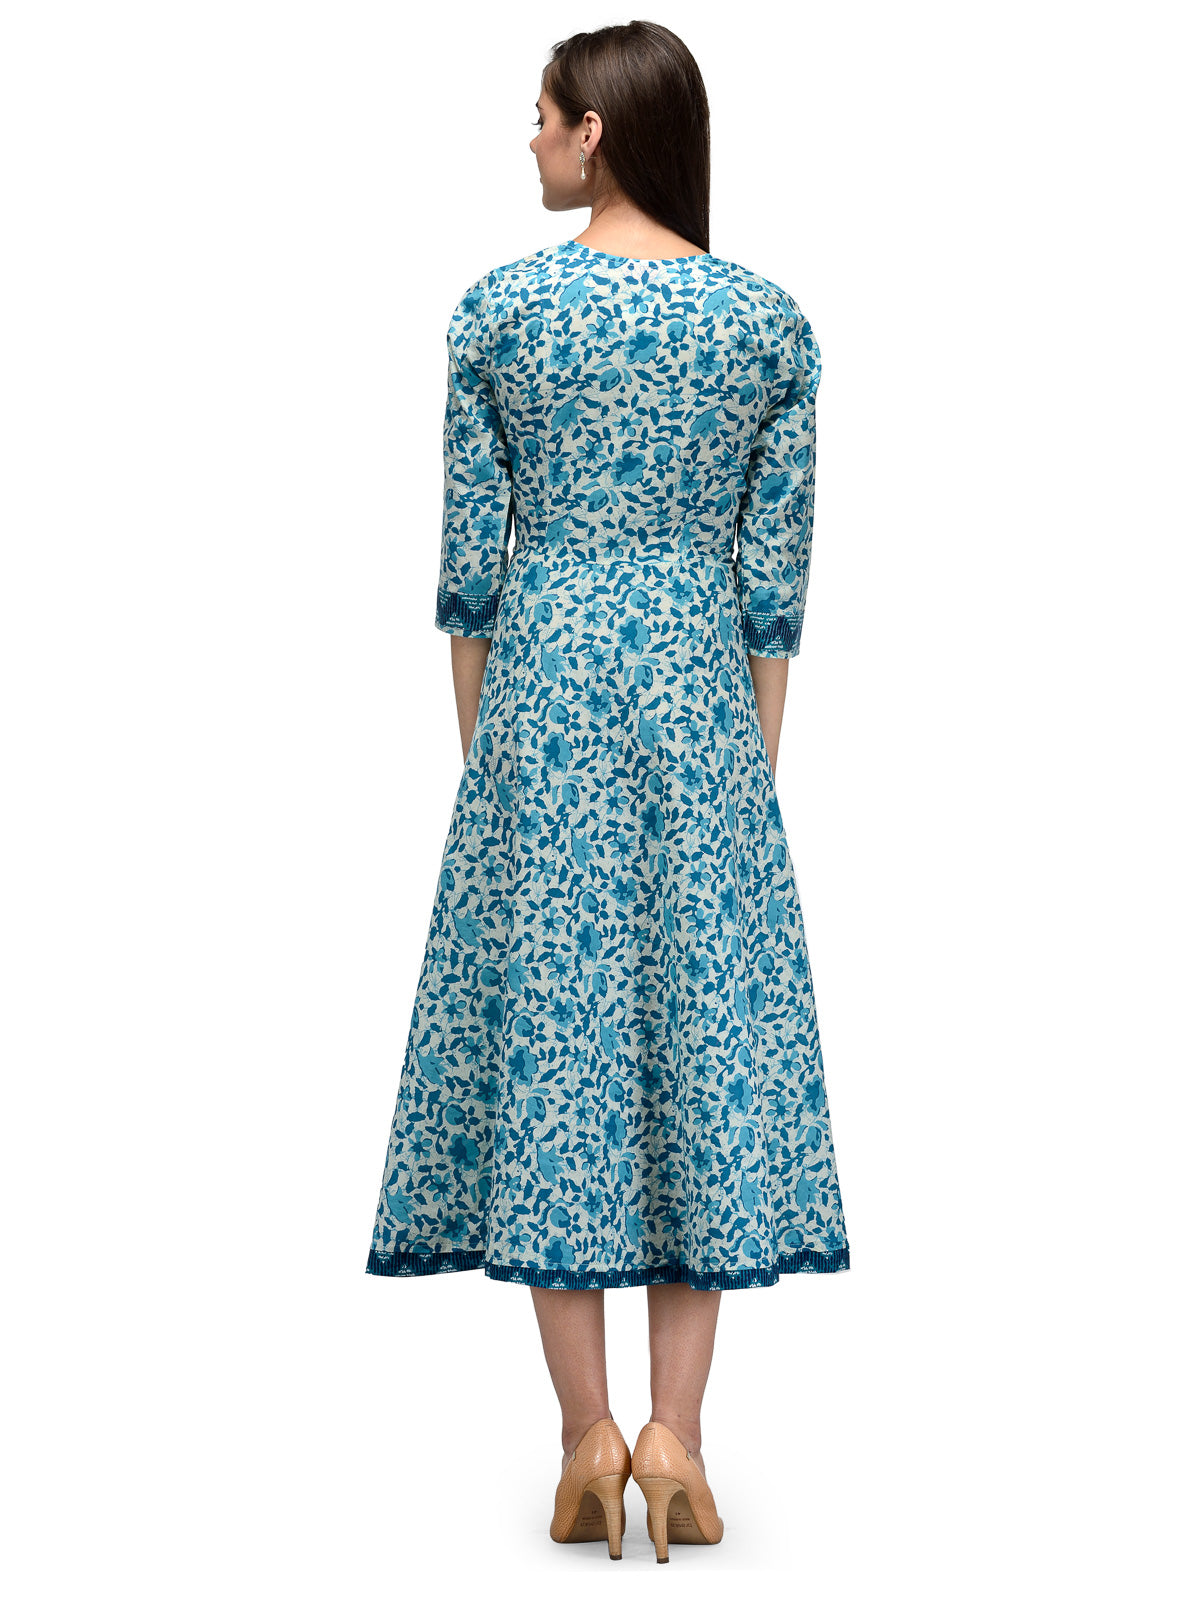 Women's blue dress in printed cotton UD6005